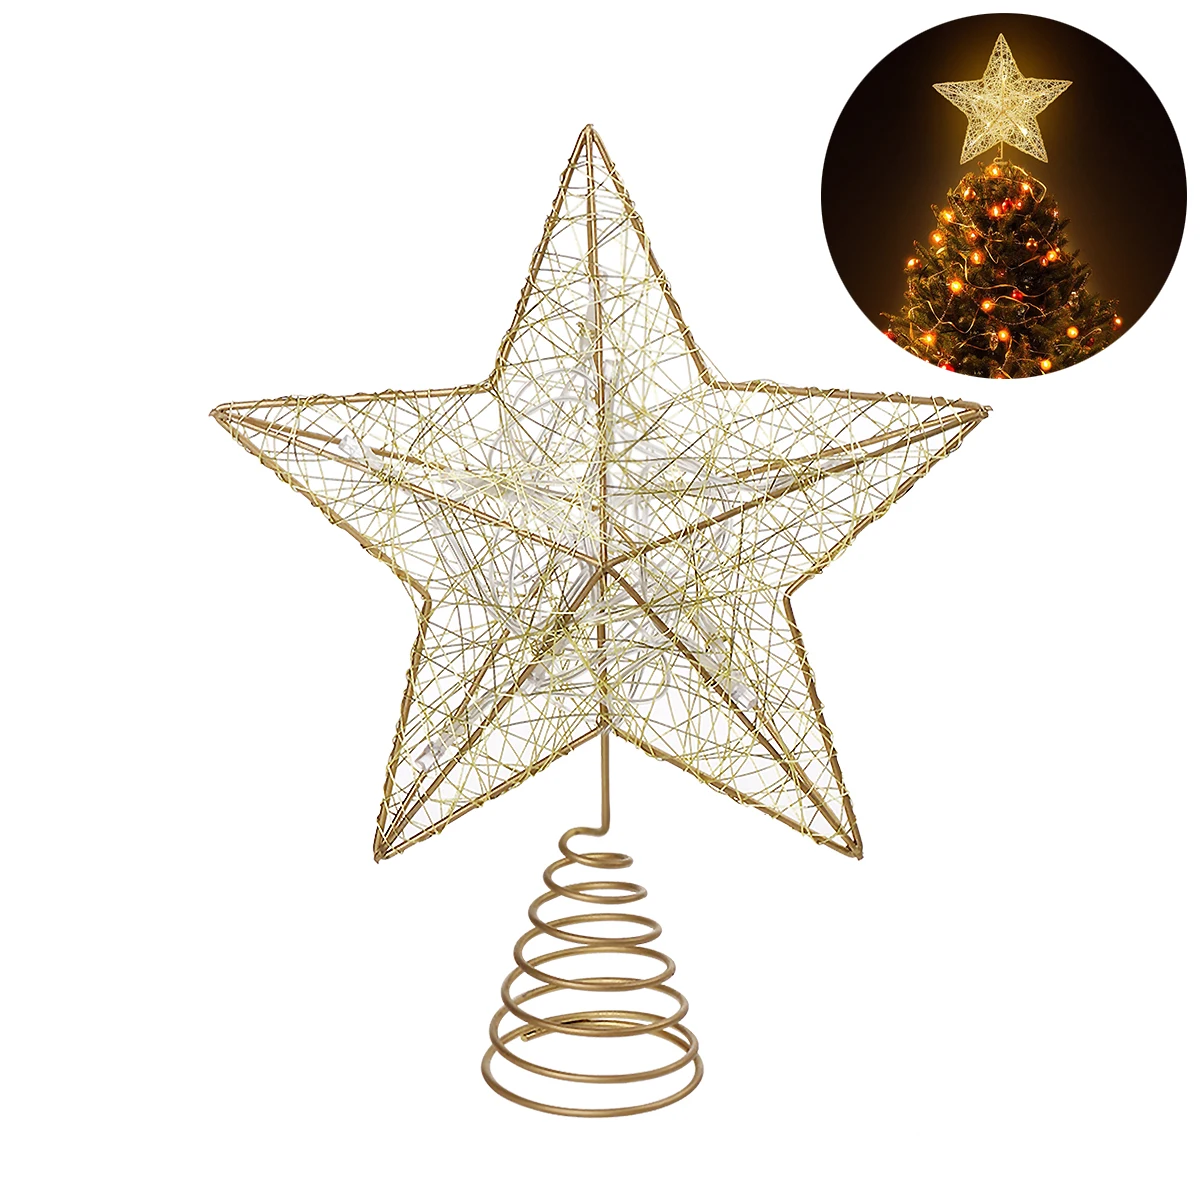 

NICEXMAS Christmas Tree LED Star Tree Topper Battery Operated Xmas Treetop Home Ornaments New Year Decoration Gold A30